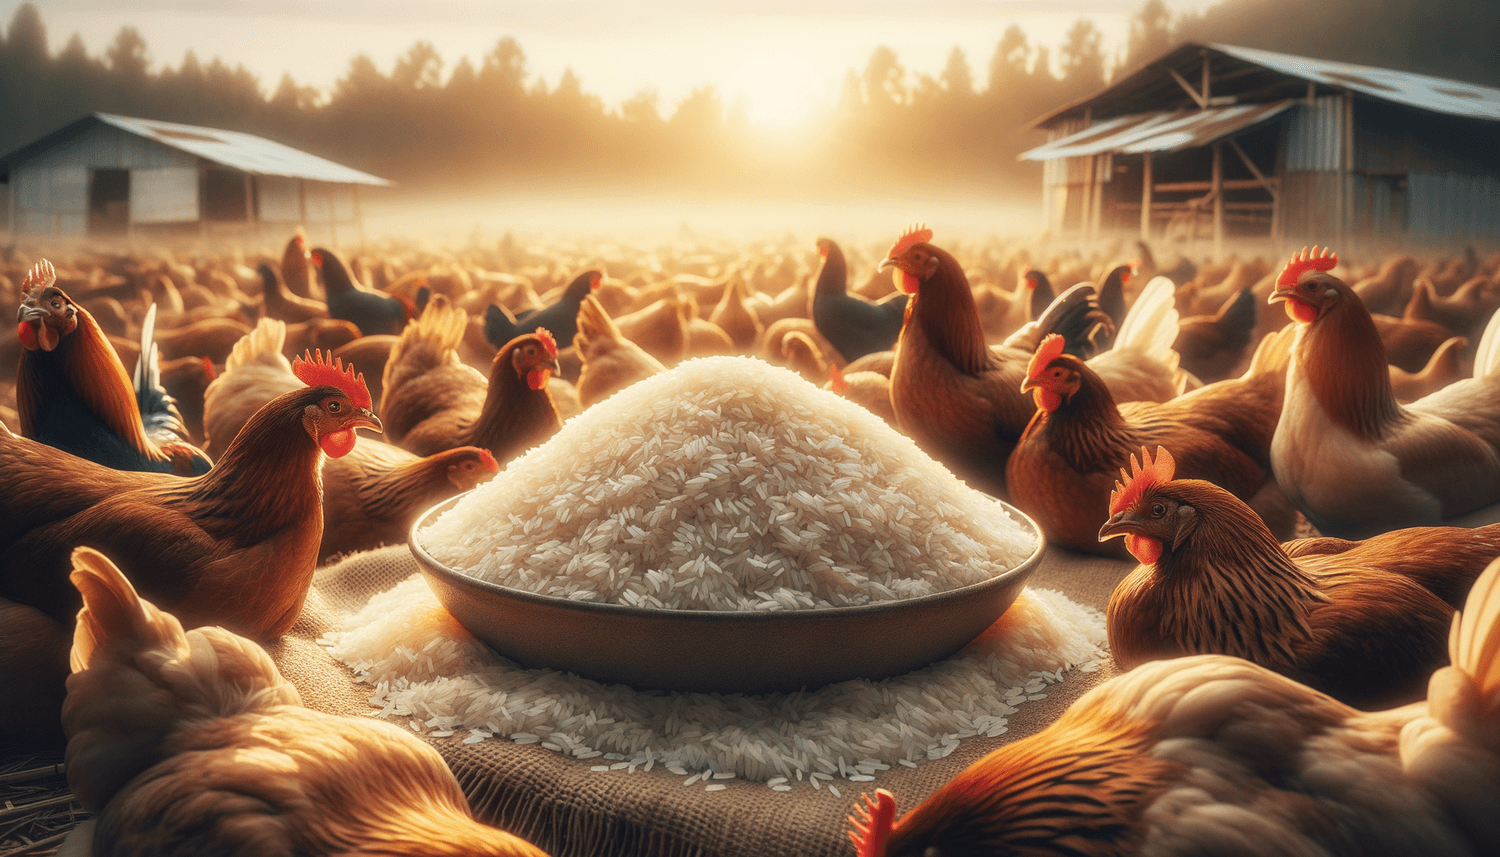 Can Chickens Eat Cooked Rice?